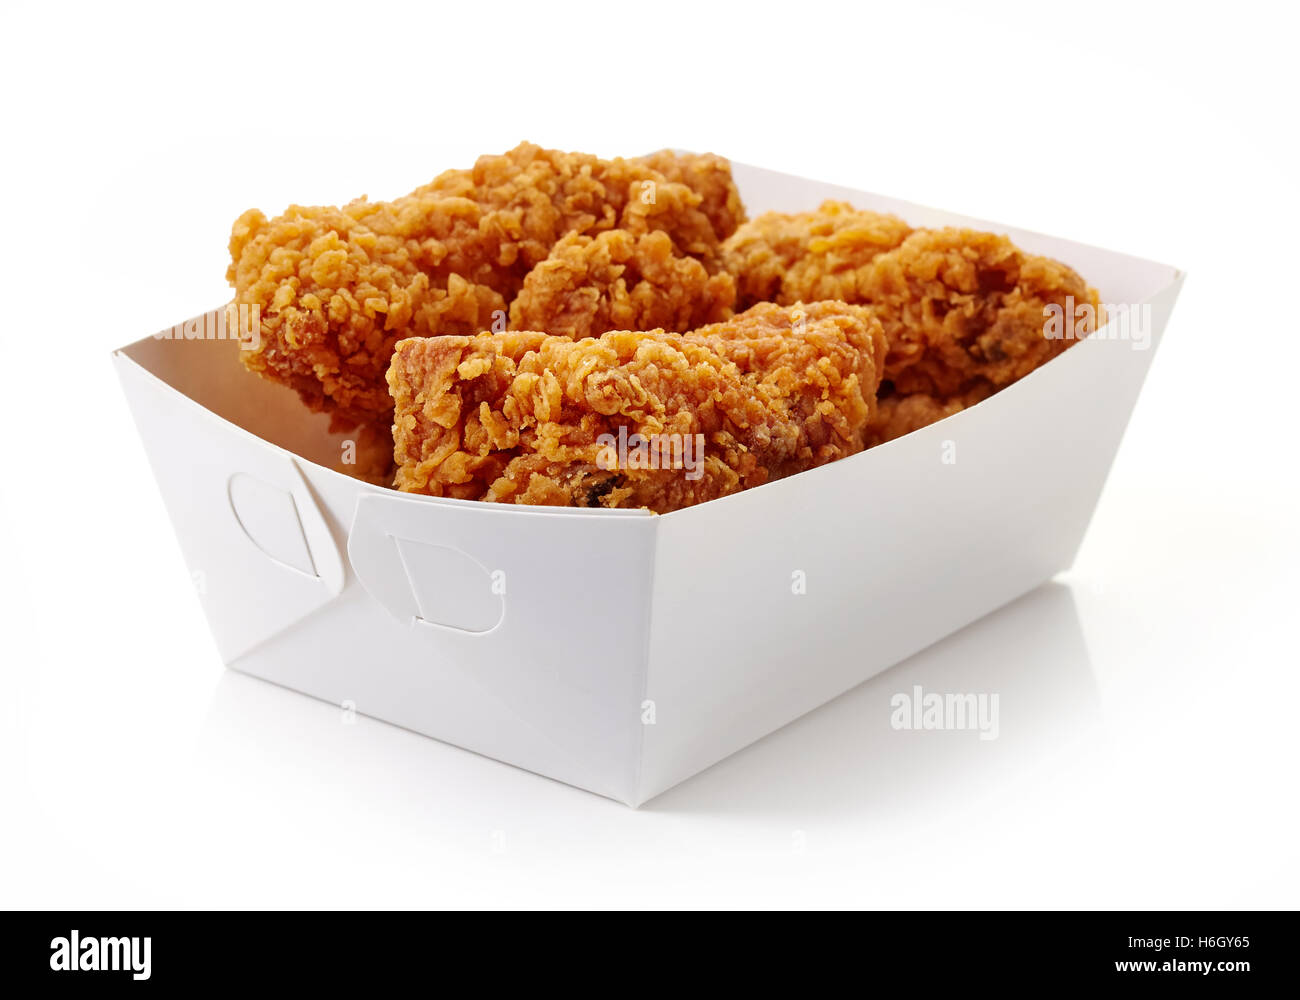 Fried breaded chicken wings in white cardbord box isolated on white background Stock Photo